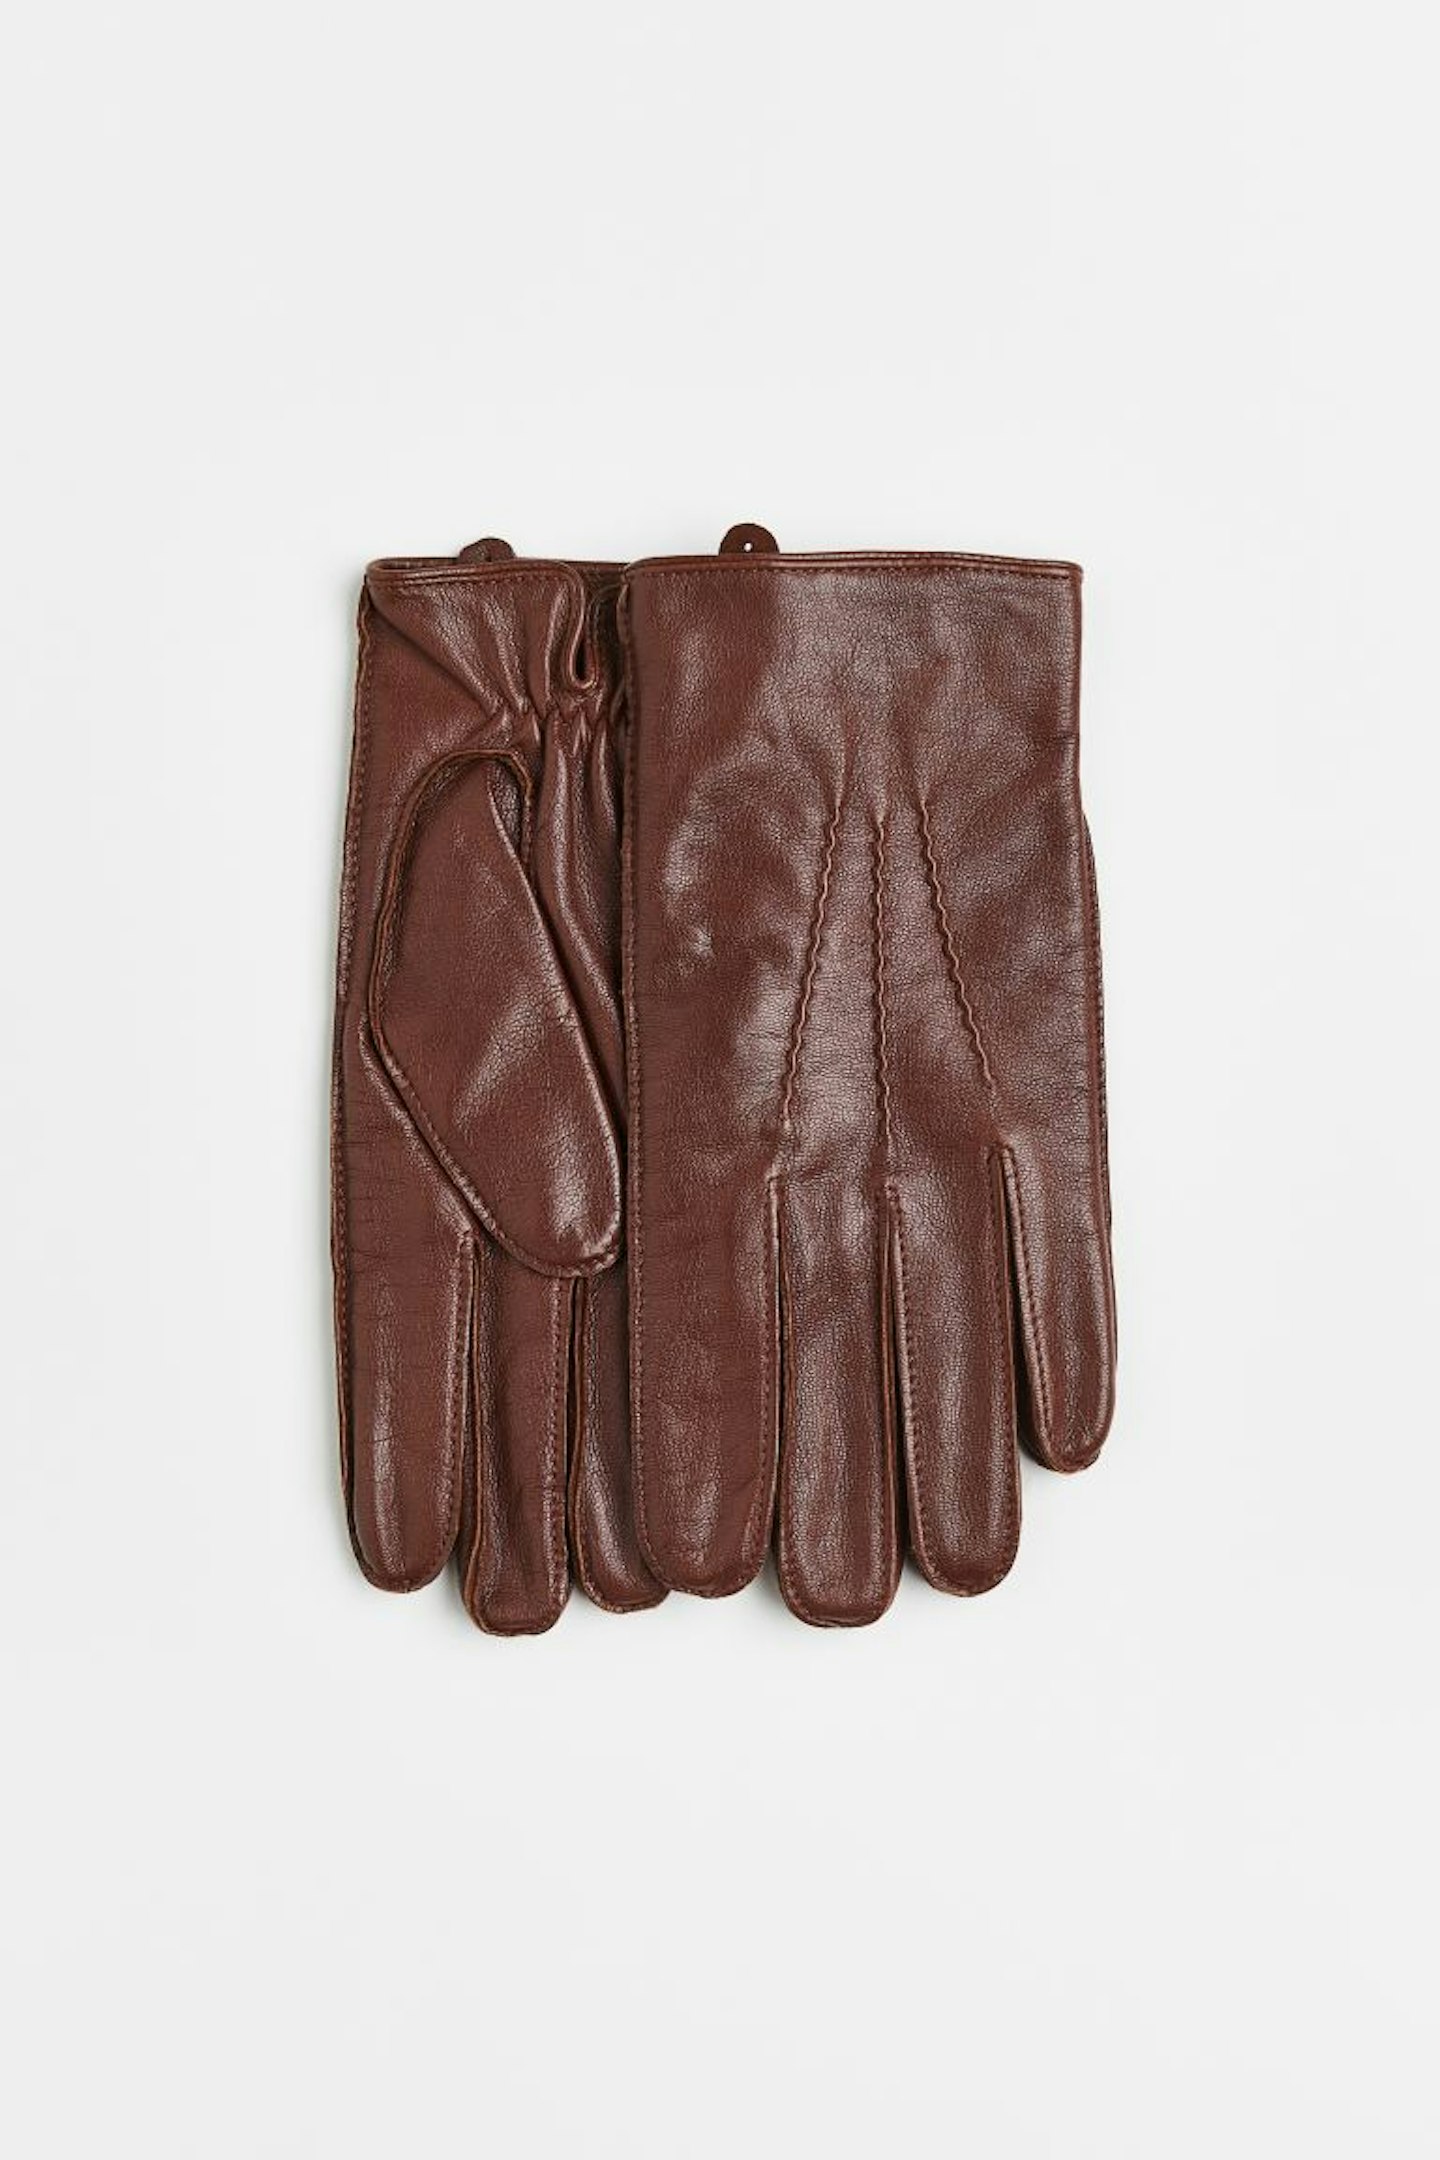 H&M, Leather Gloves